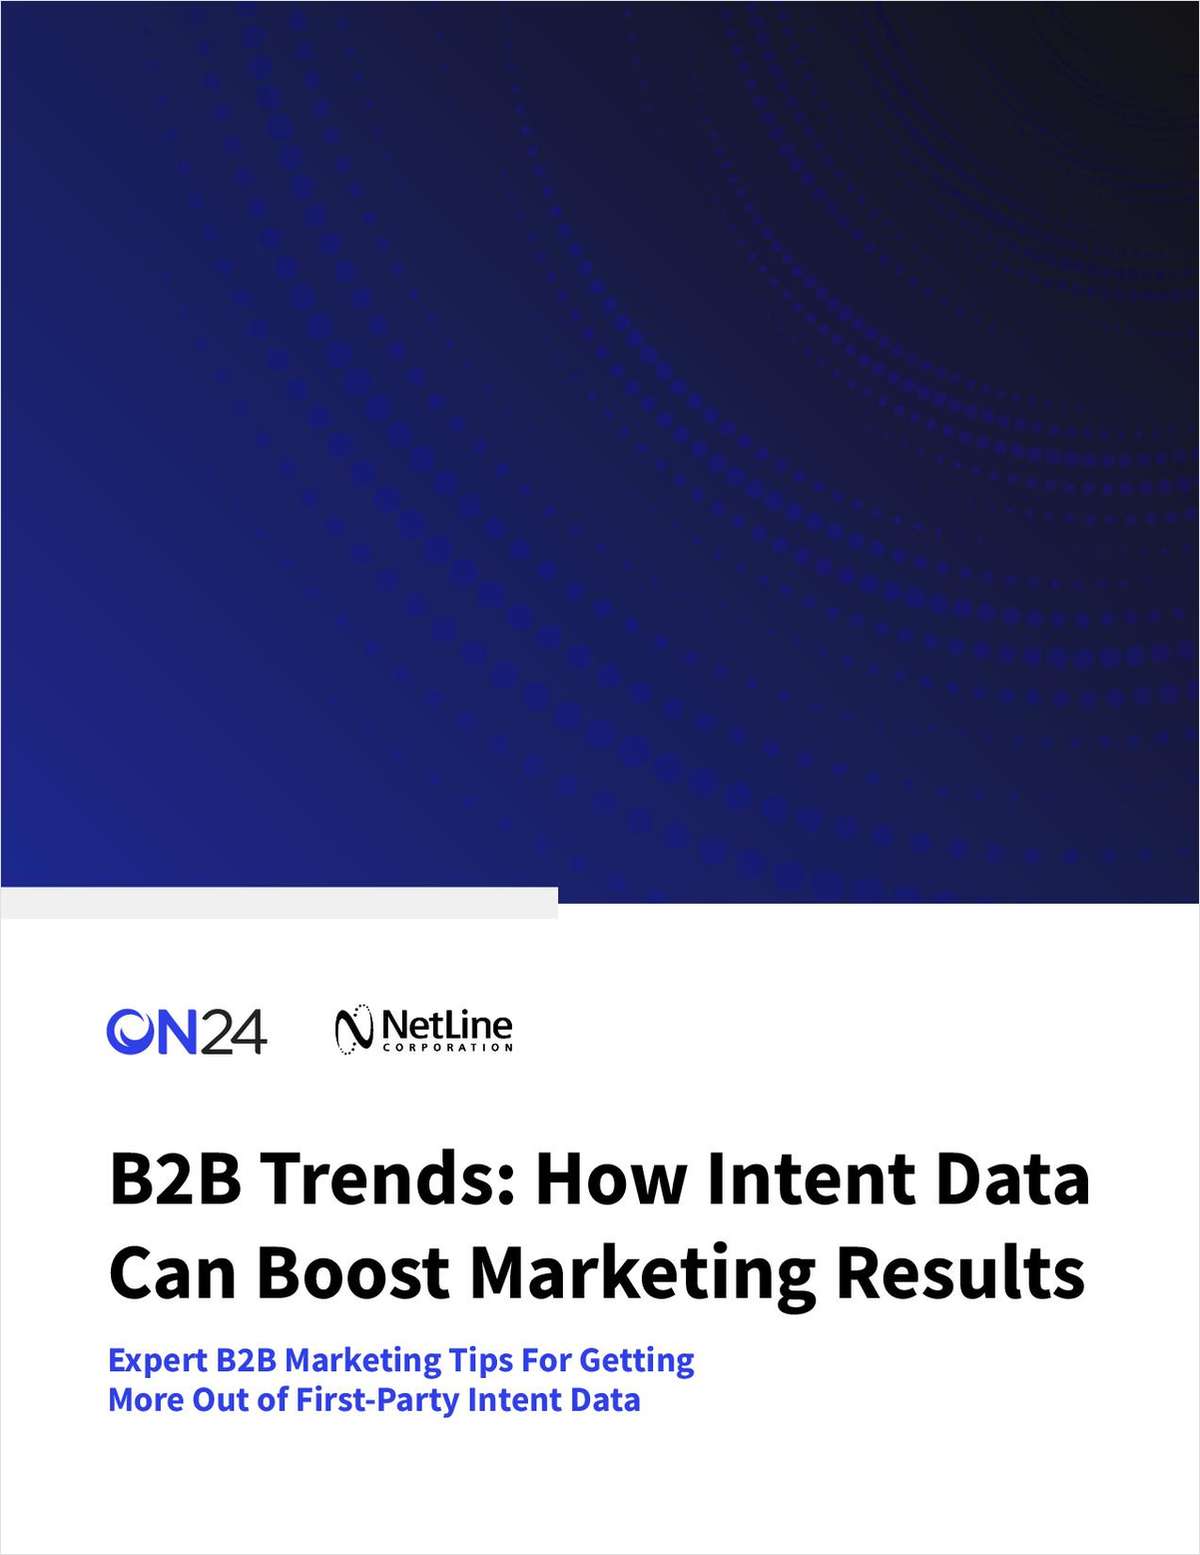 How Intent Data Can Boost Marketing Results